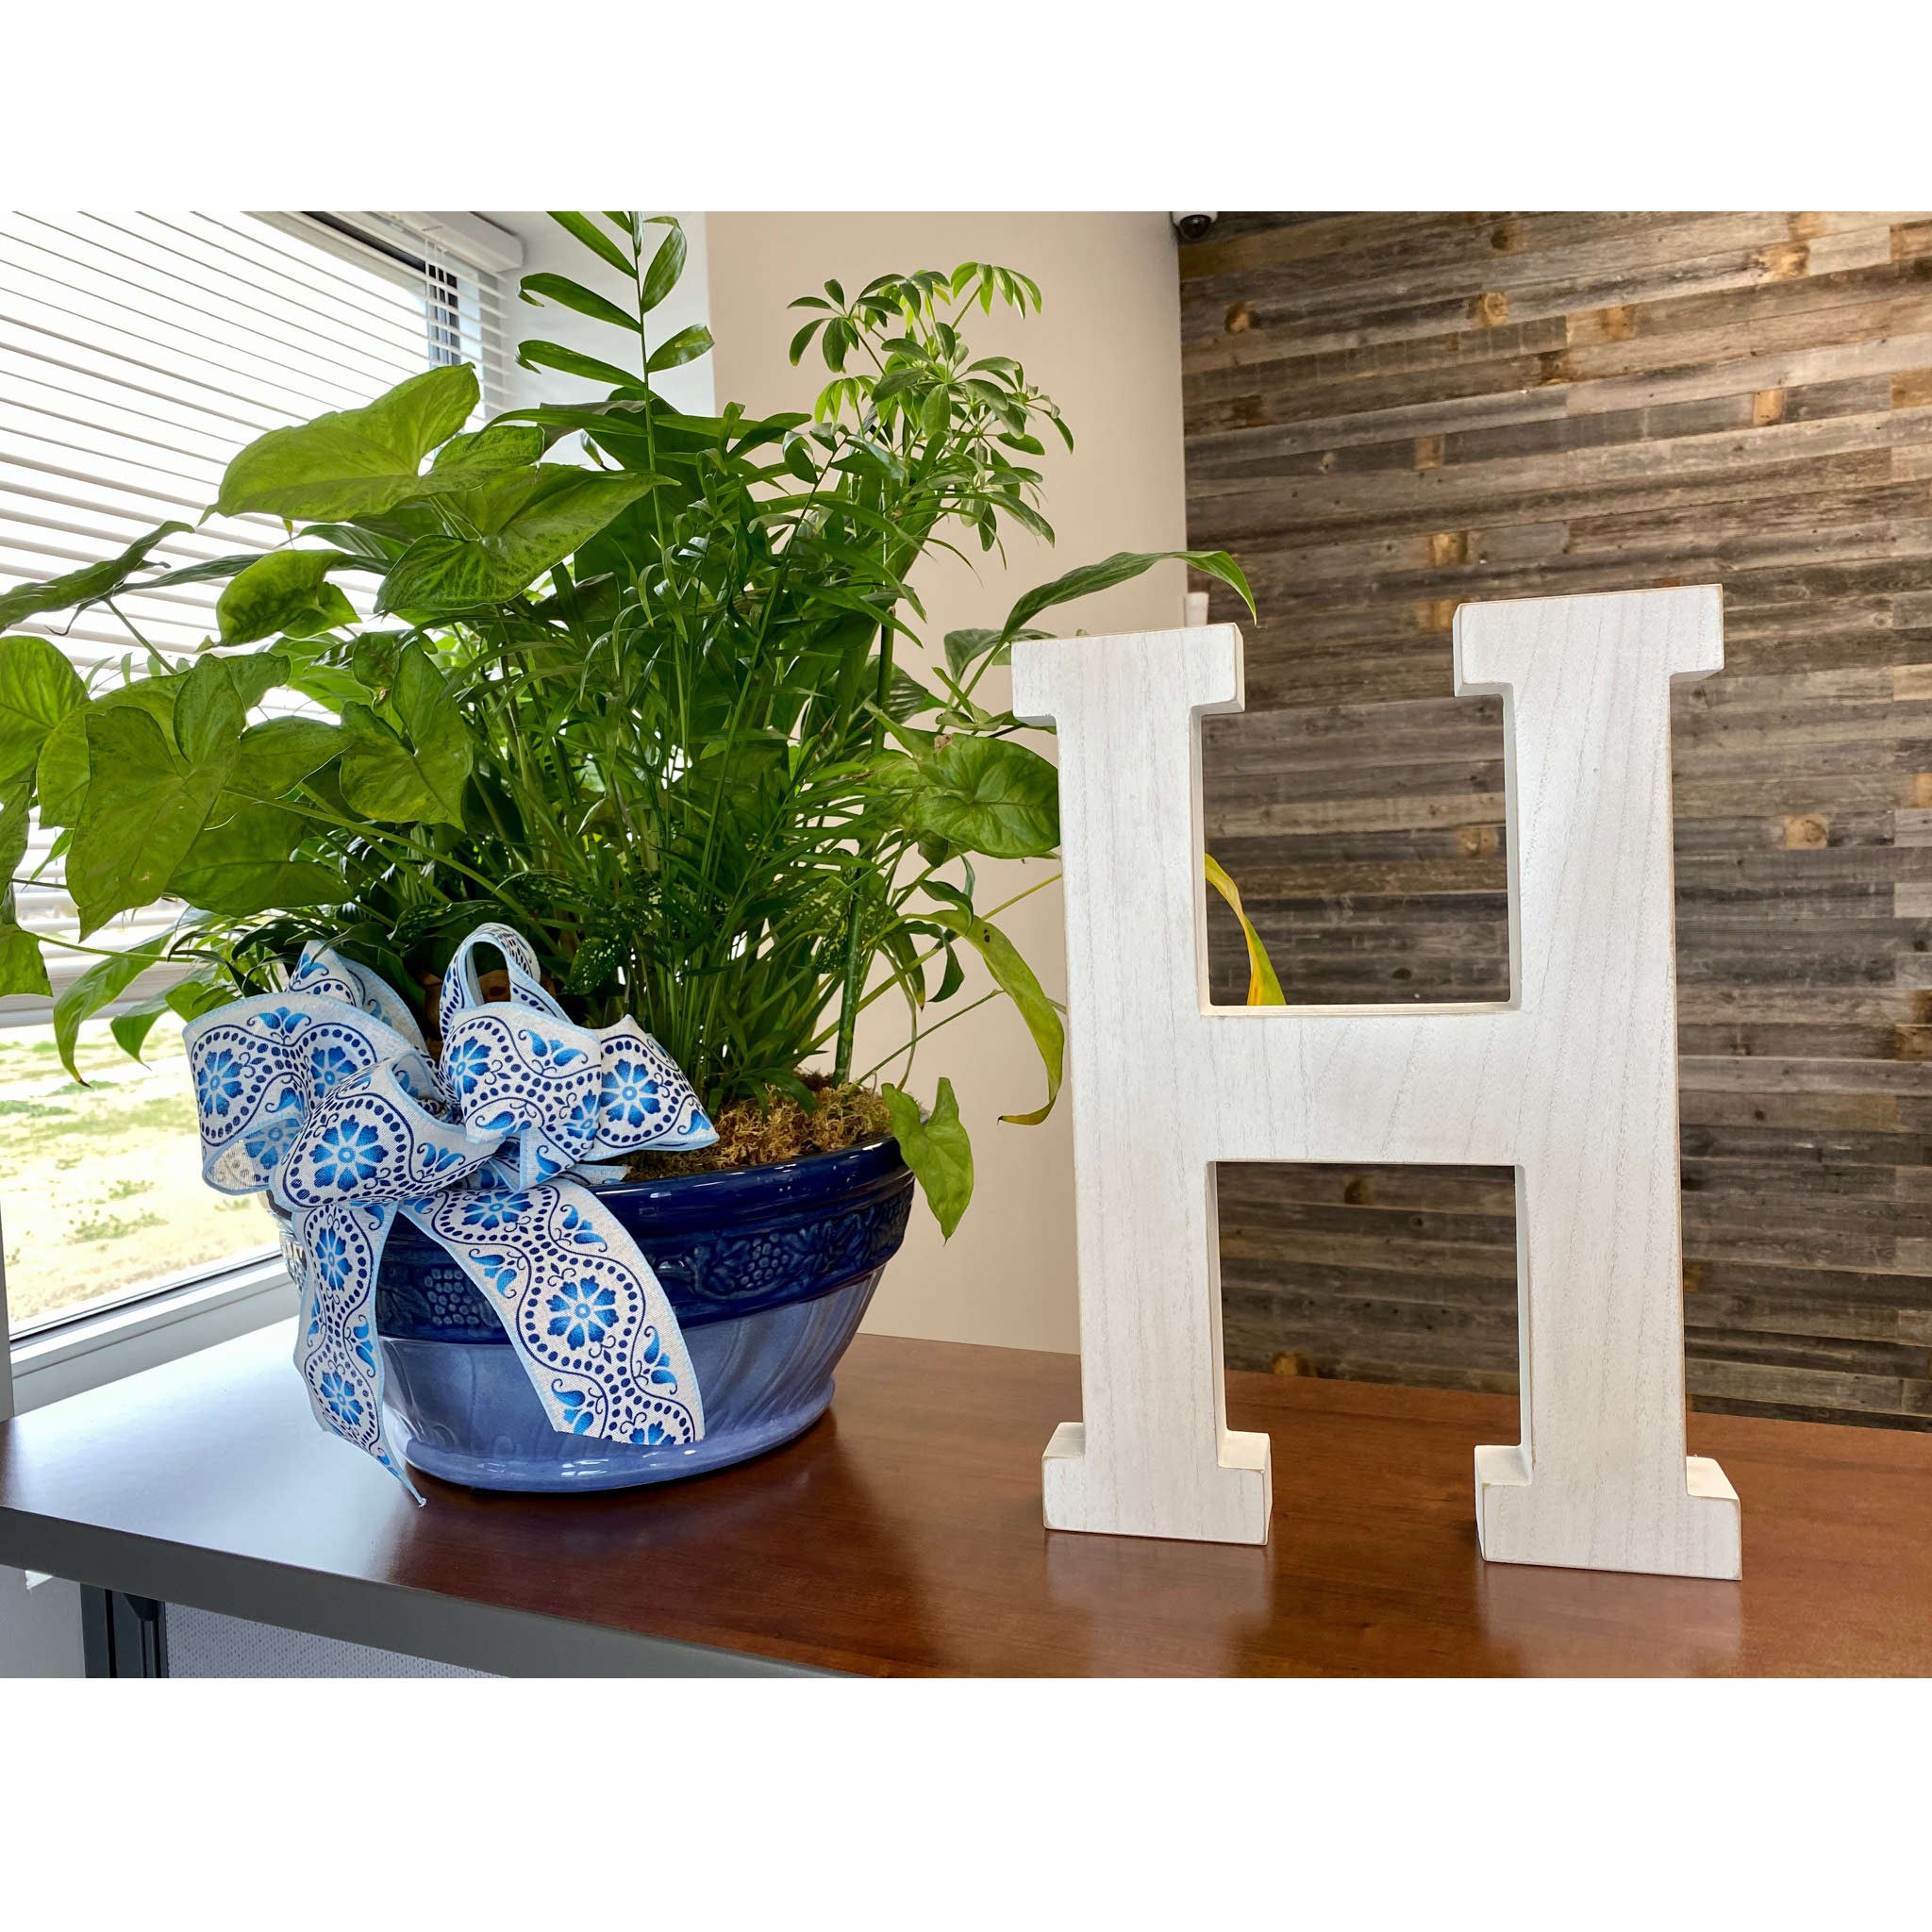 16" Distressed White Wash Wooden Initial Letter H Sculpture